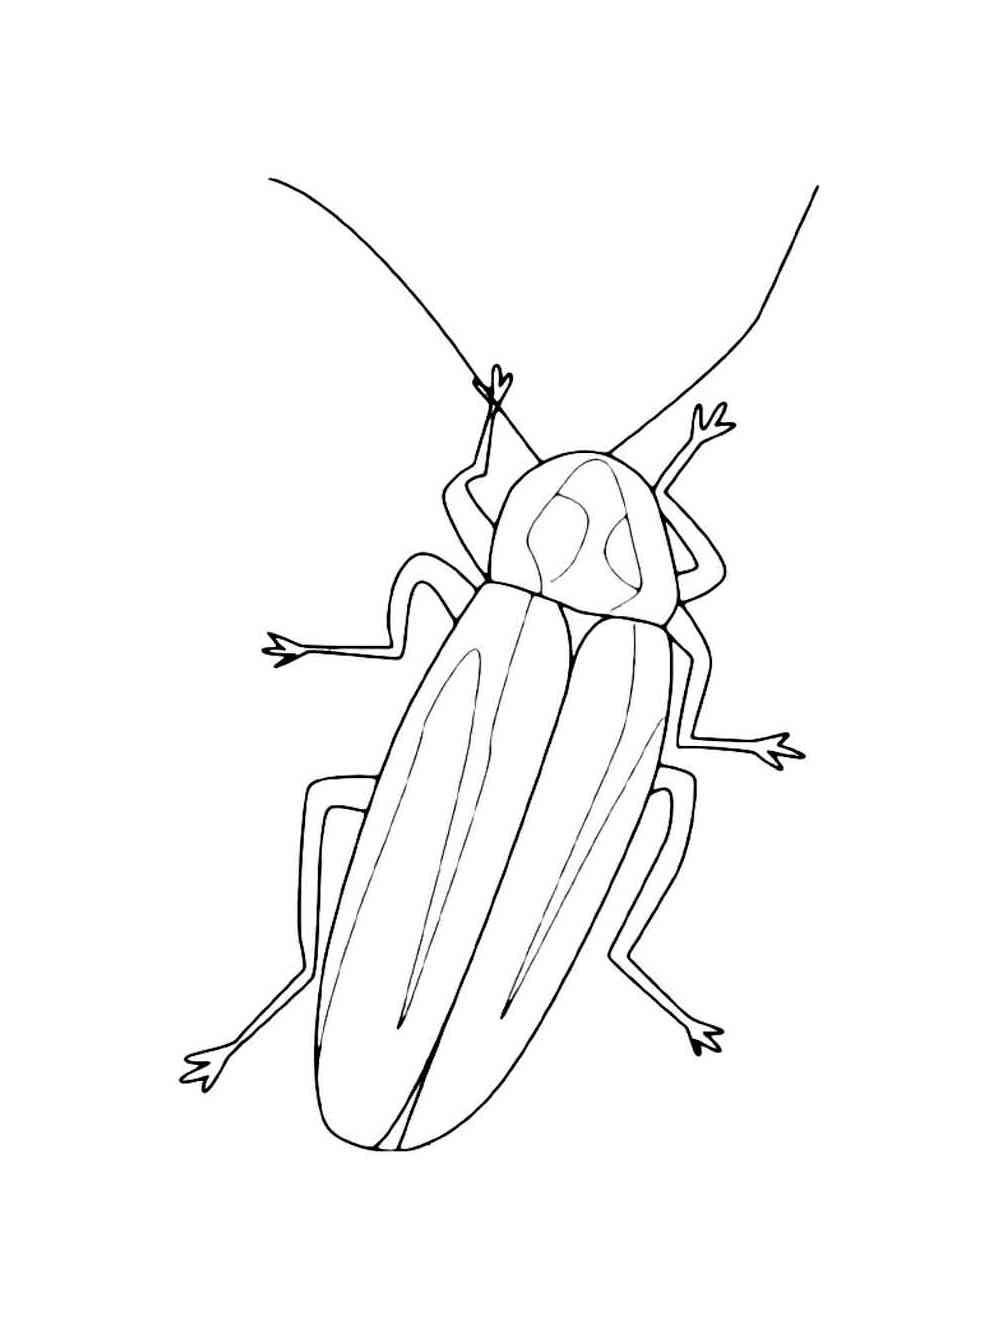 Common German Cockroach coloring page